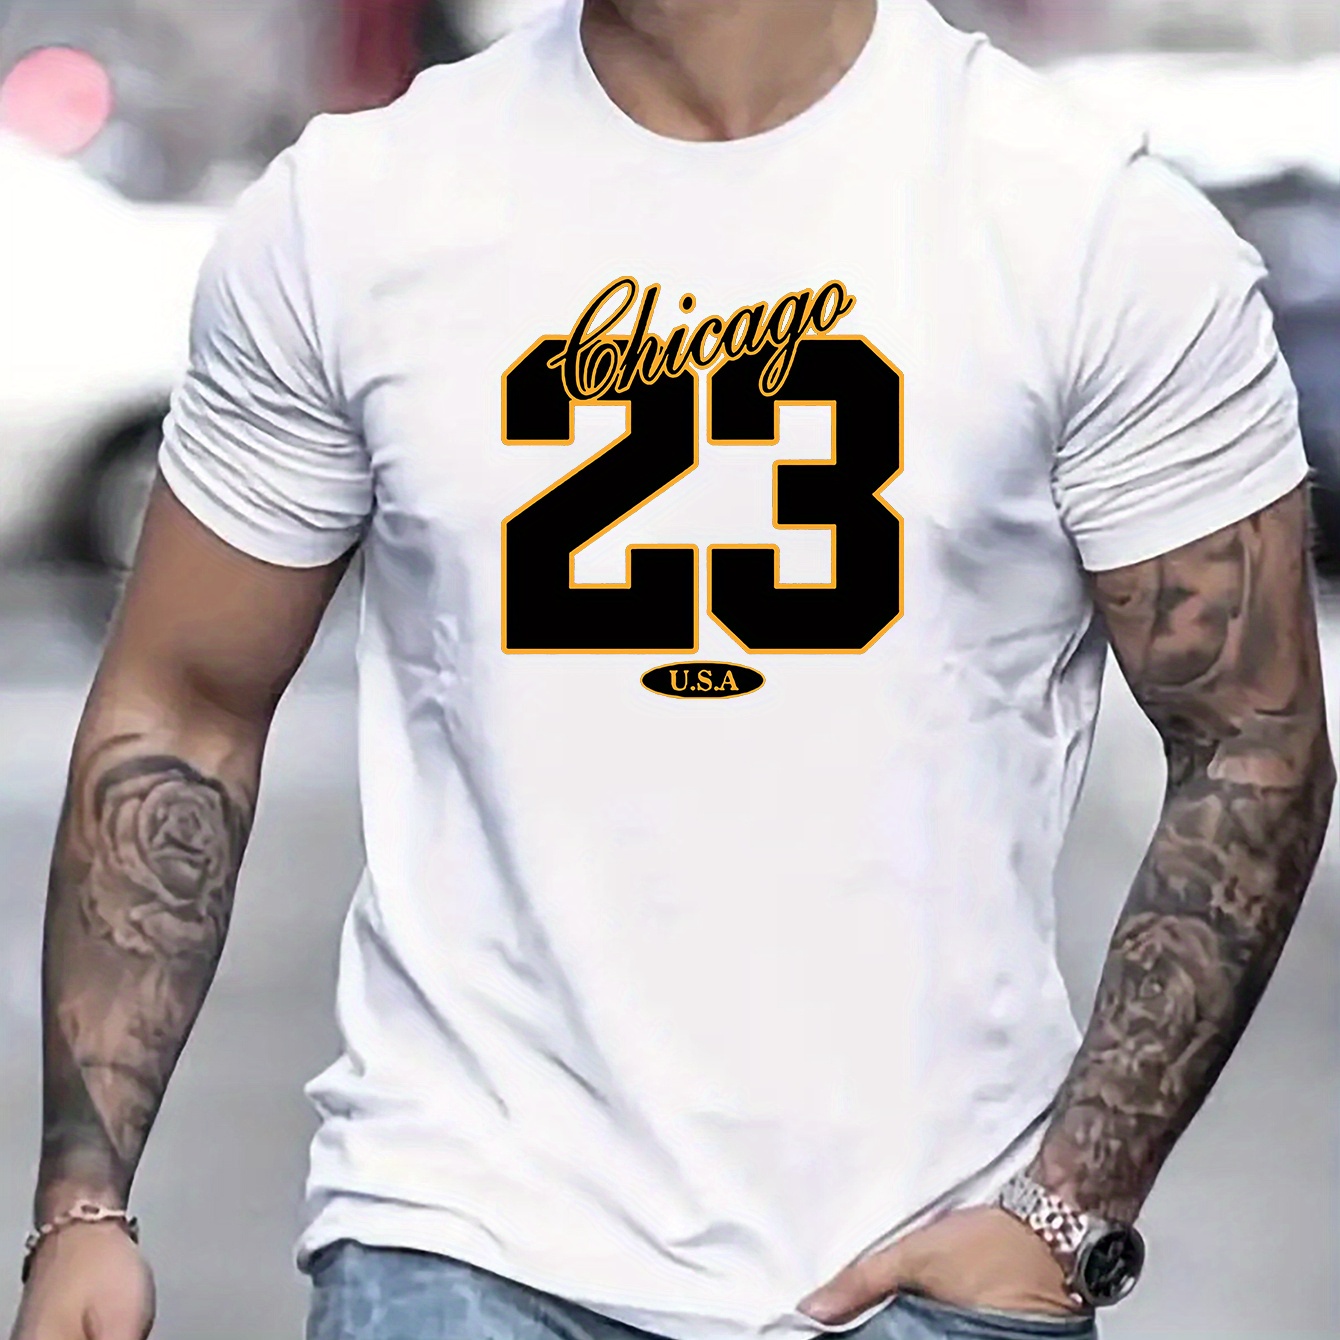 

Chicago 23 Print Men's Trendy Street Style T-shirts, Casual Graphic Tee, Short Sleeve Round Neck Sports Tops, Men's Clothing For Outdoor Activities Summer